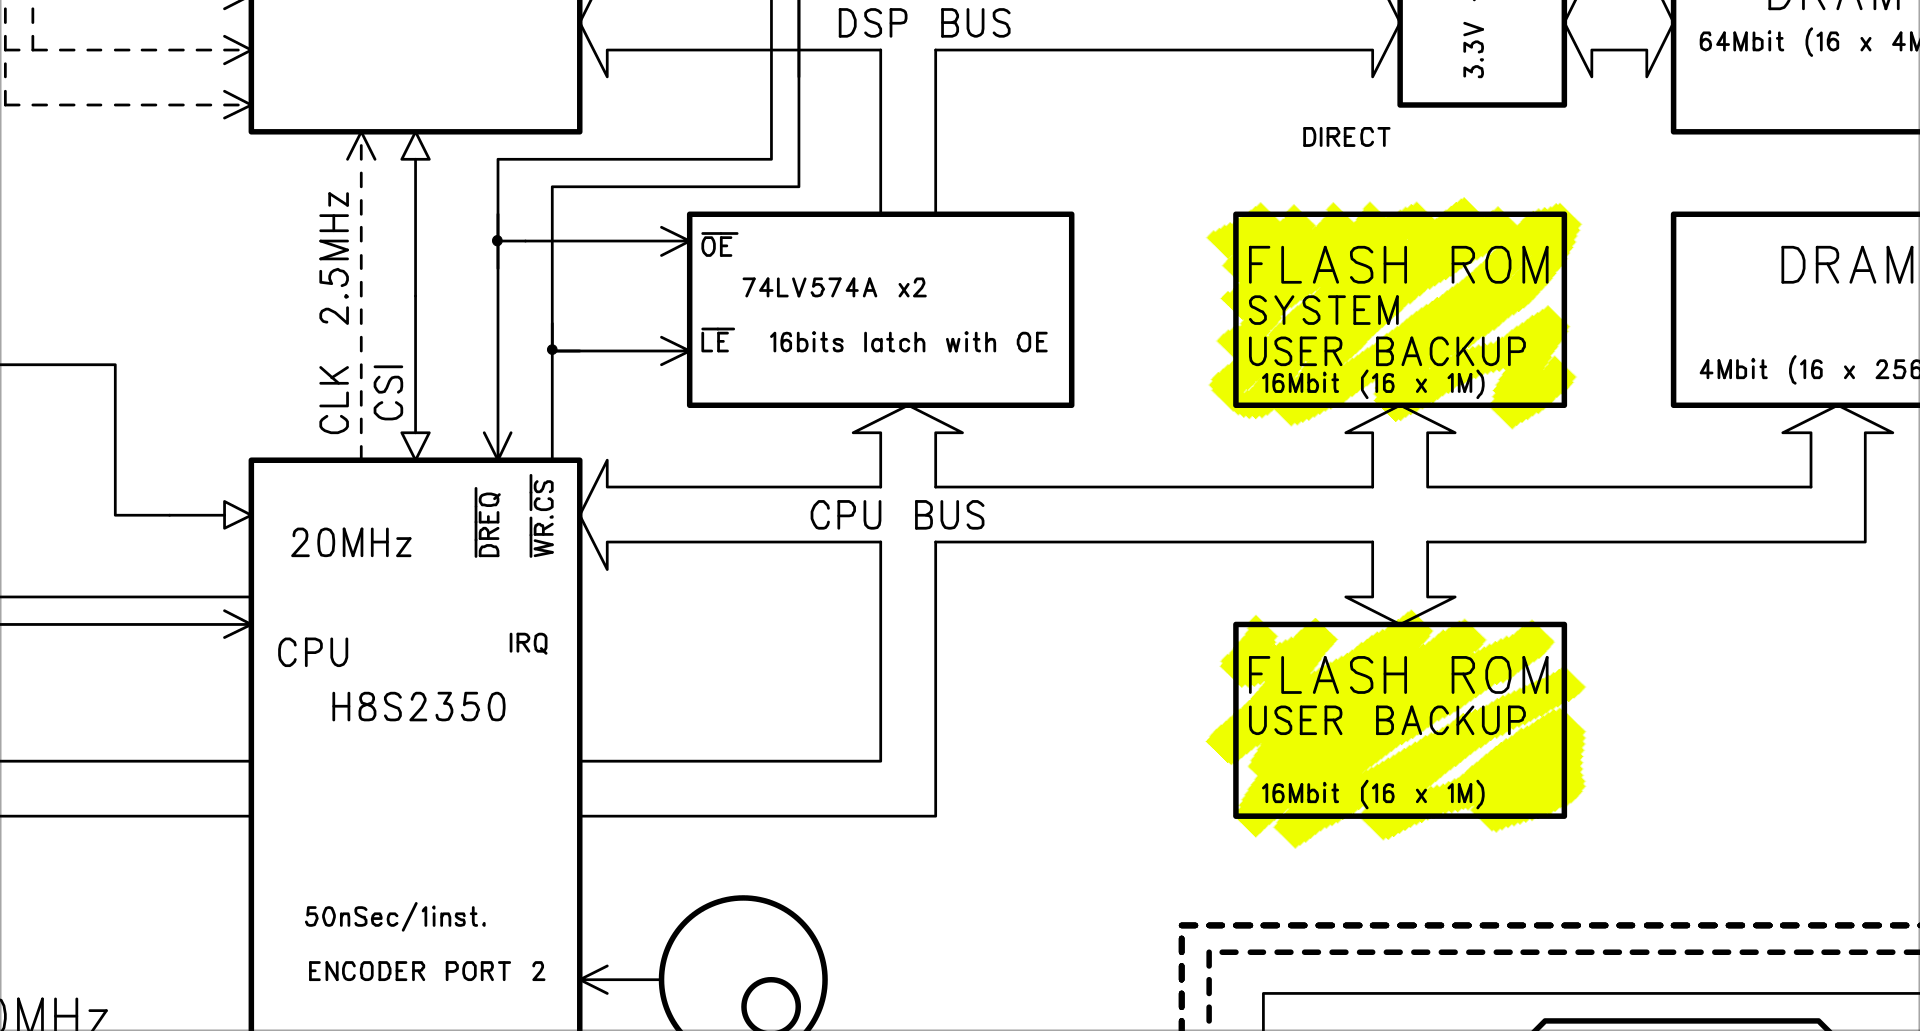 Excerpt of the block diagram in the ES-1 service manual. Shows that the CPU bus connects the CPU to the flash memory chips.